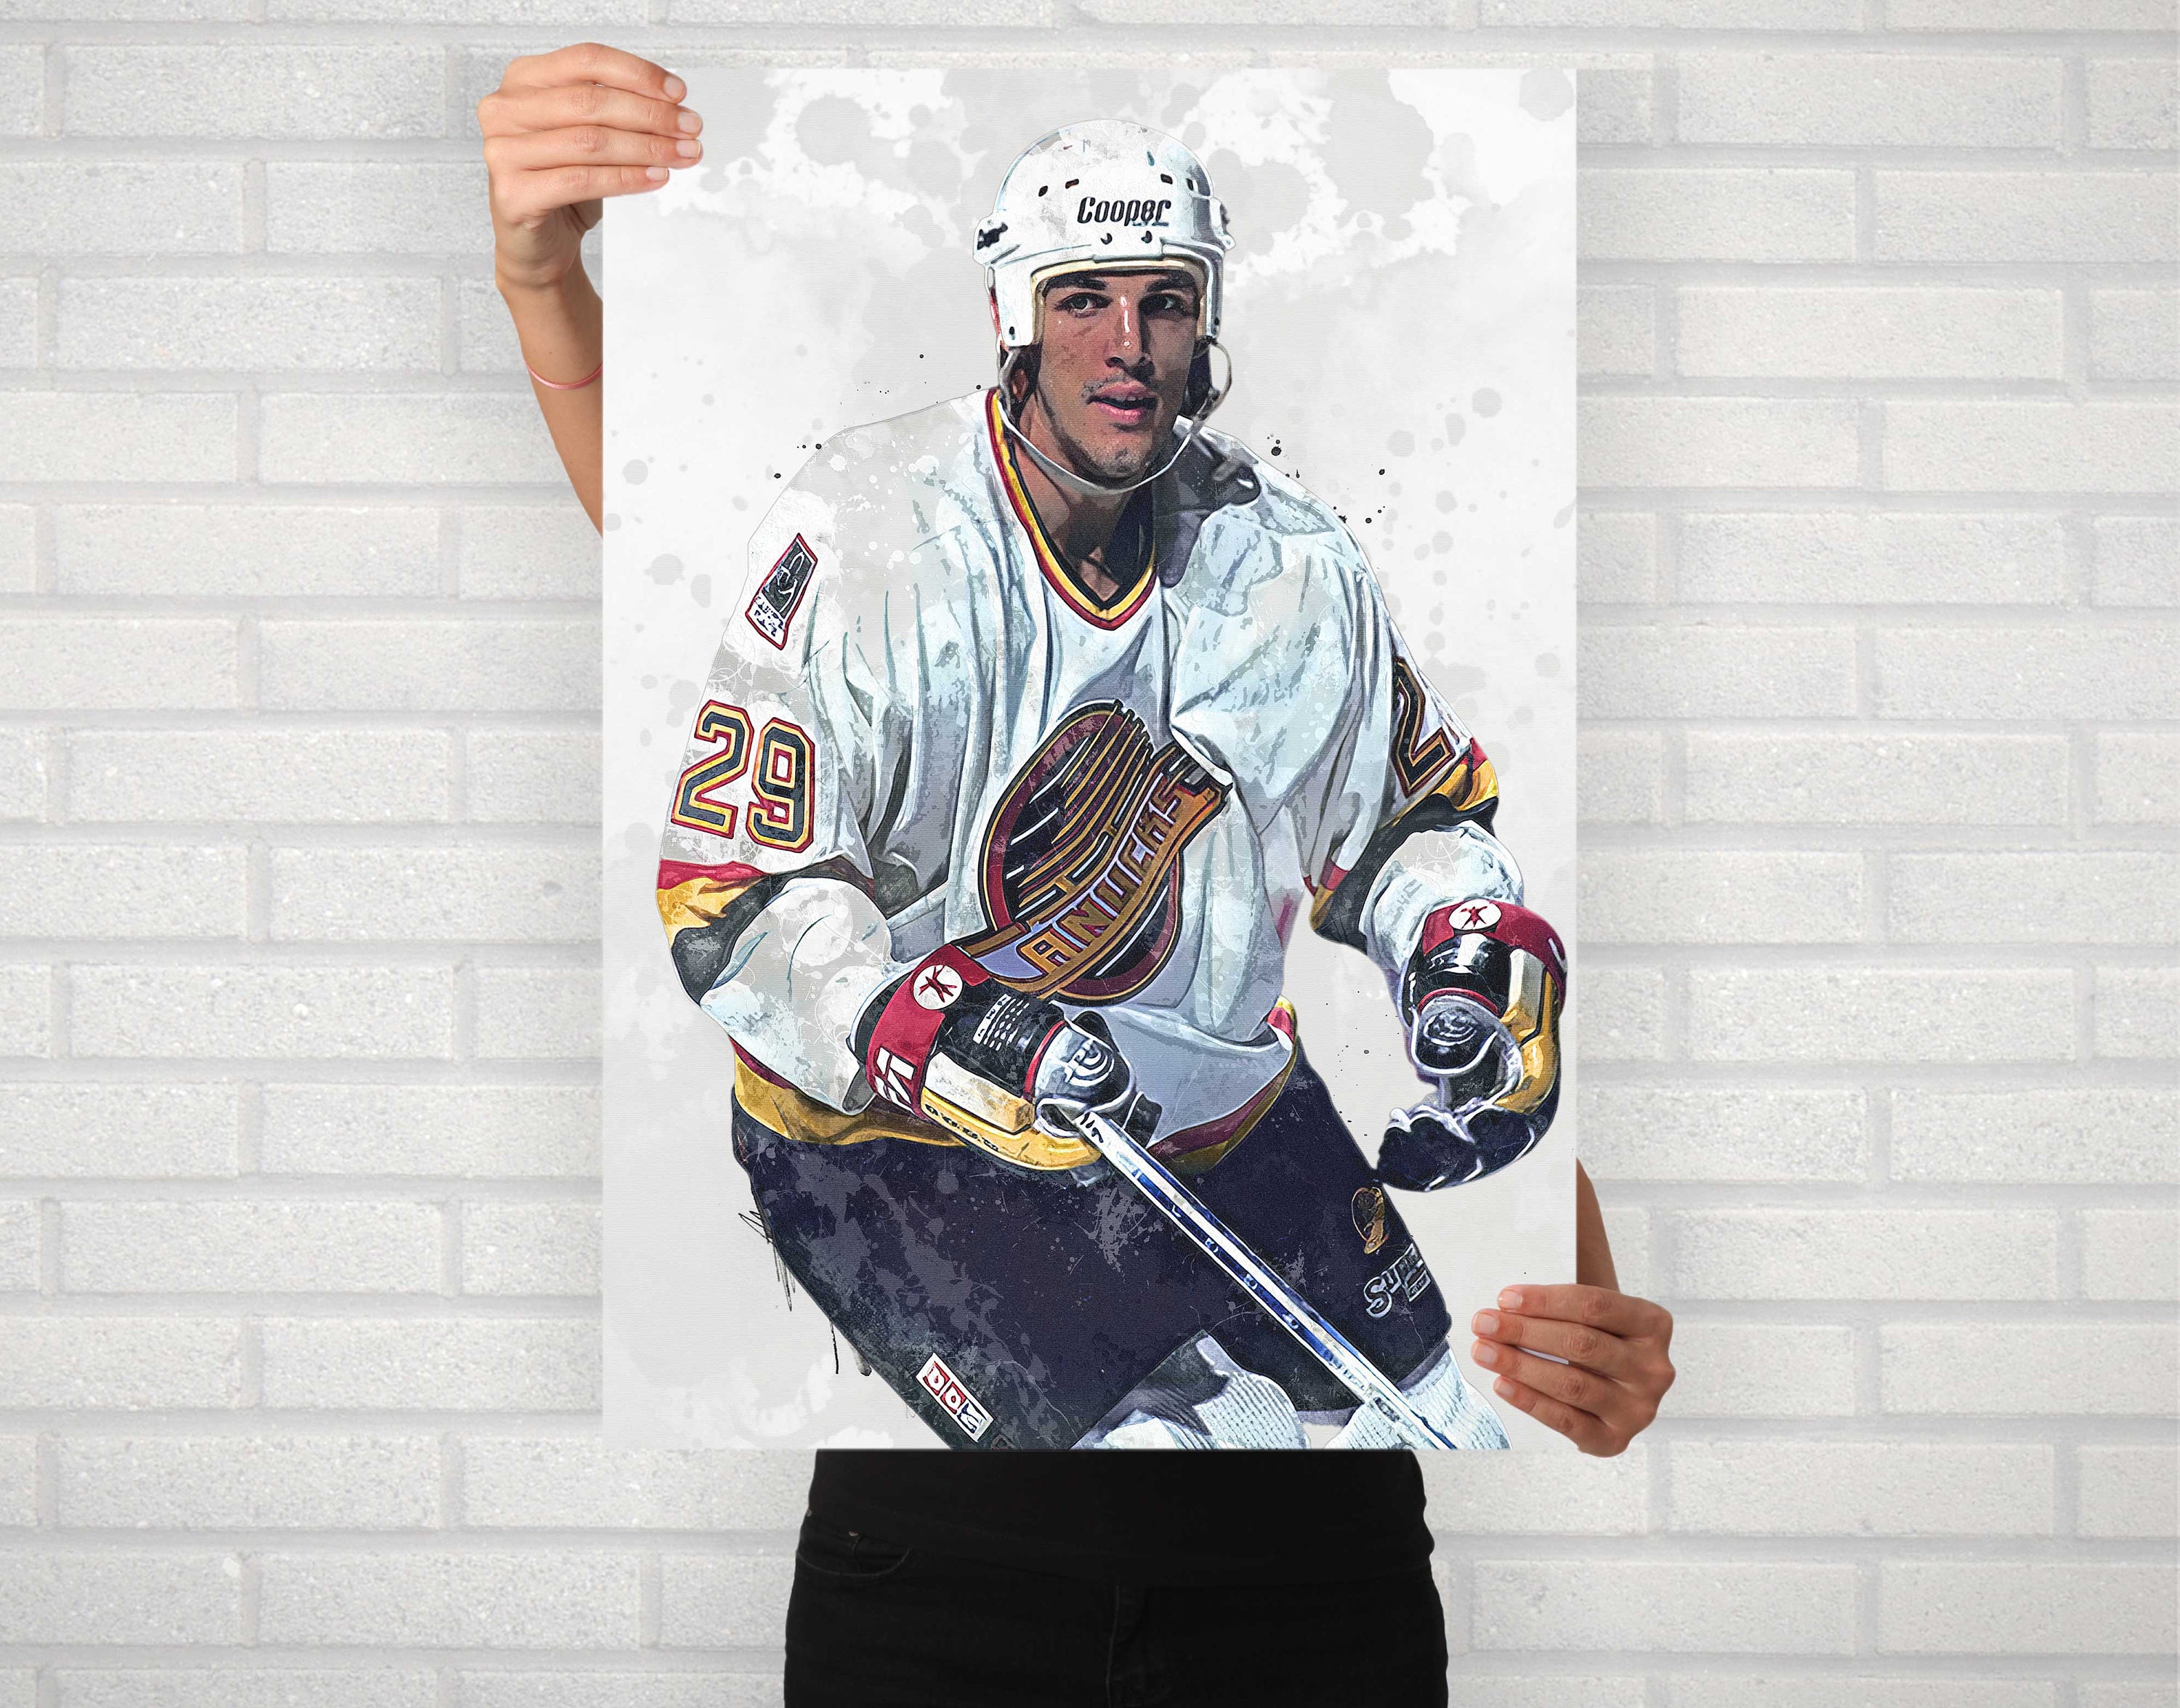 Pavel Bure Hockey Puck Poster4 Canvas Poster Bedroom Decor Sports Landscape  Office Room Decor Gift Unframe:24x36inch(60x90cm)